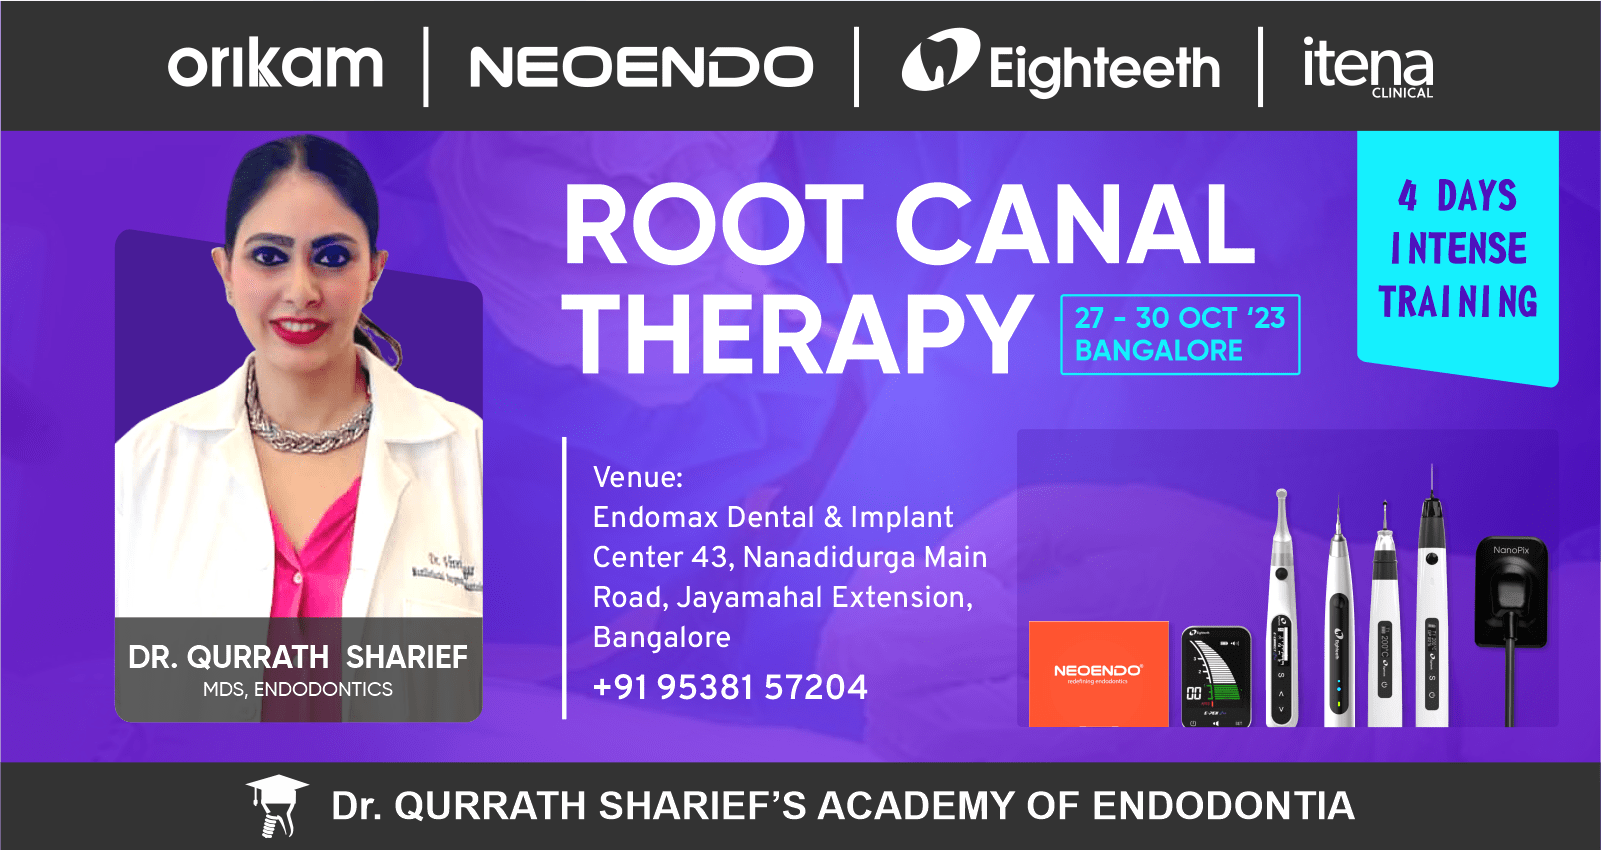 Root Canal Therapy" By Dr. Qurrath Sharief in Bangalore